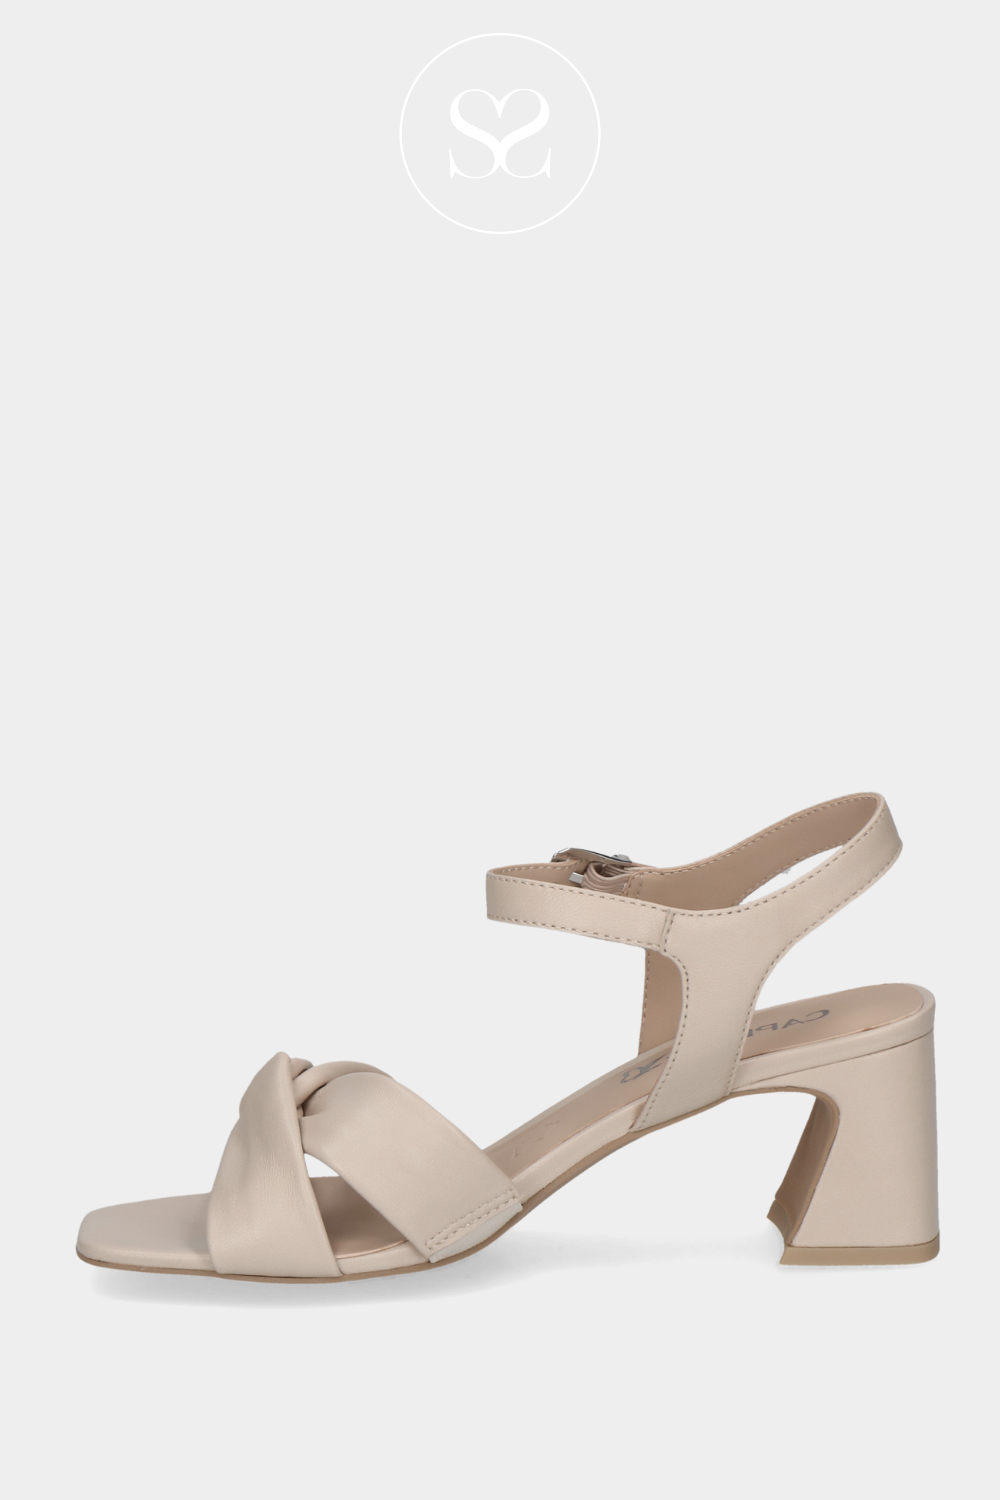 CAPRICE 9-28316-42 IVORY OFF WHITE BLOCK HEELED SANDALS WITH KNOTTED BOW ACROSS THE TOE STRAP AND AN ADJUSTABLE ANKLE STRAP